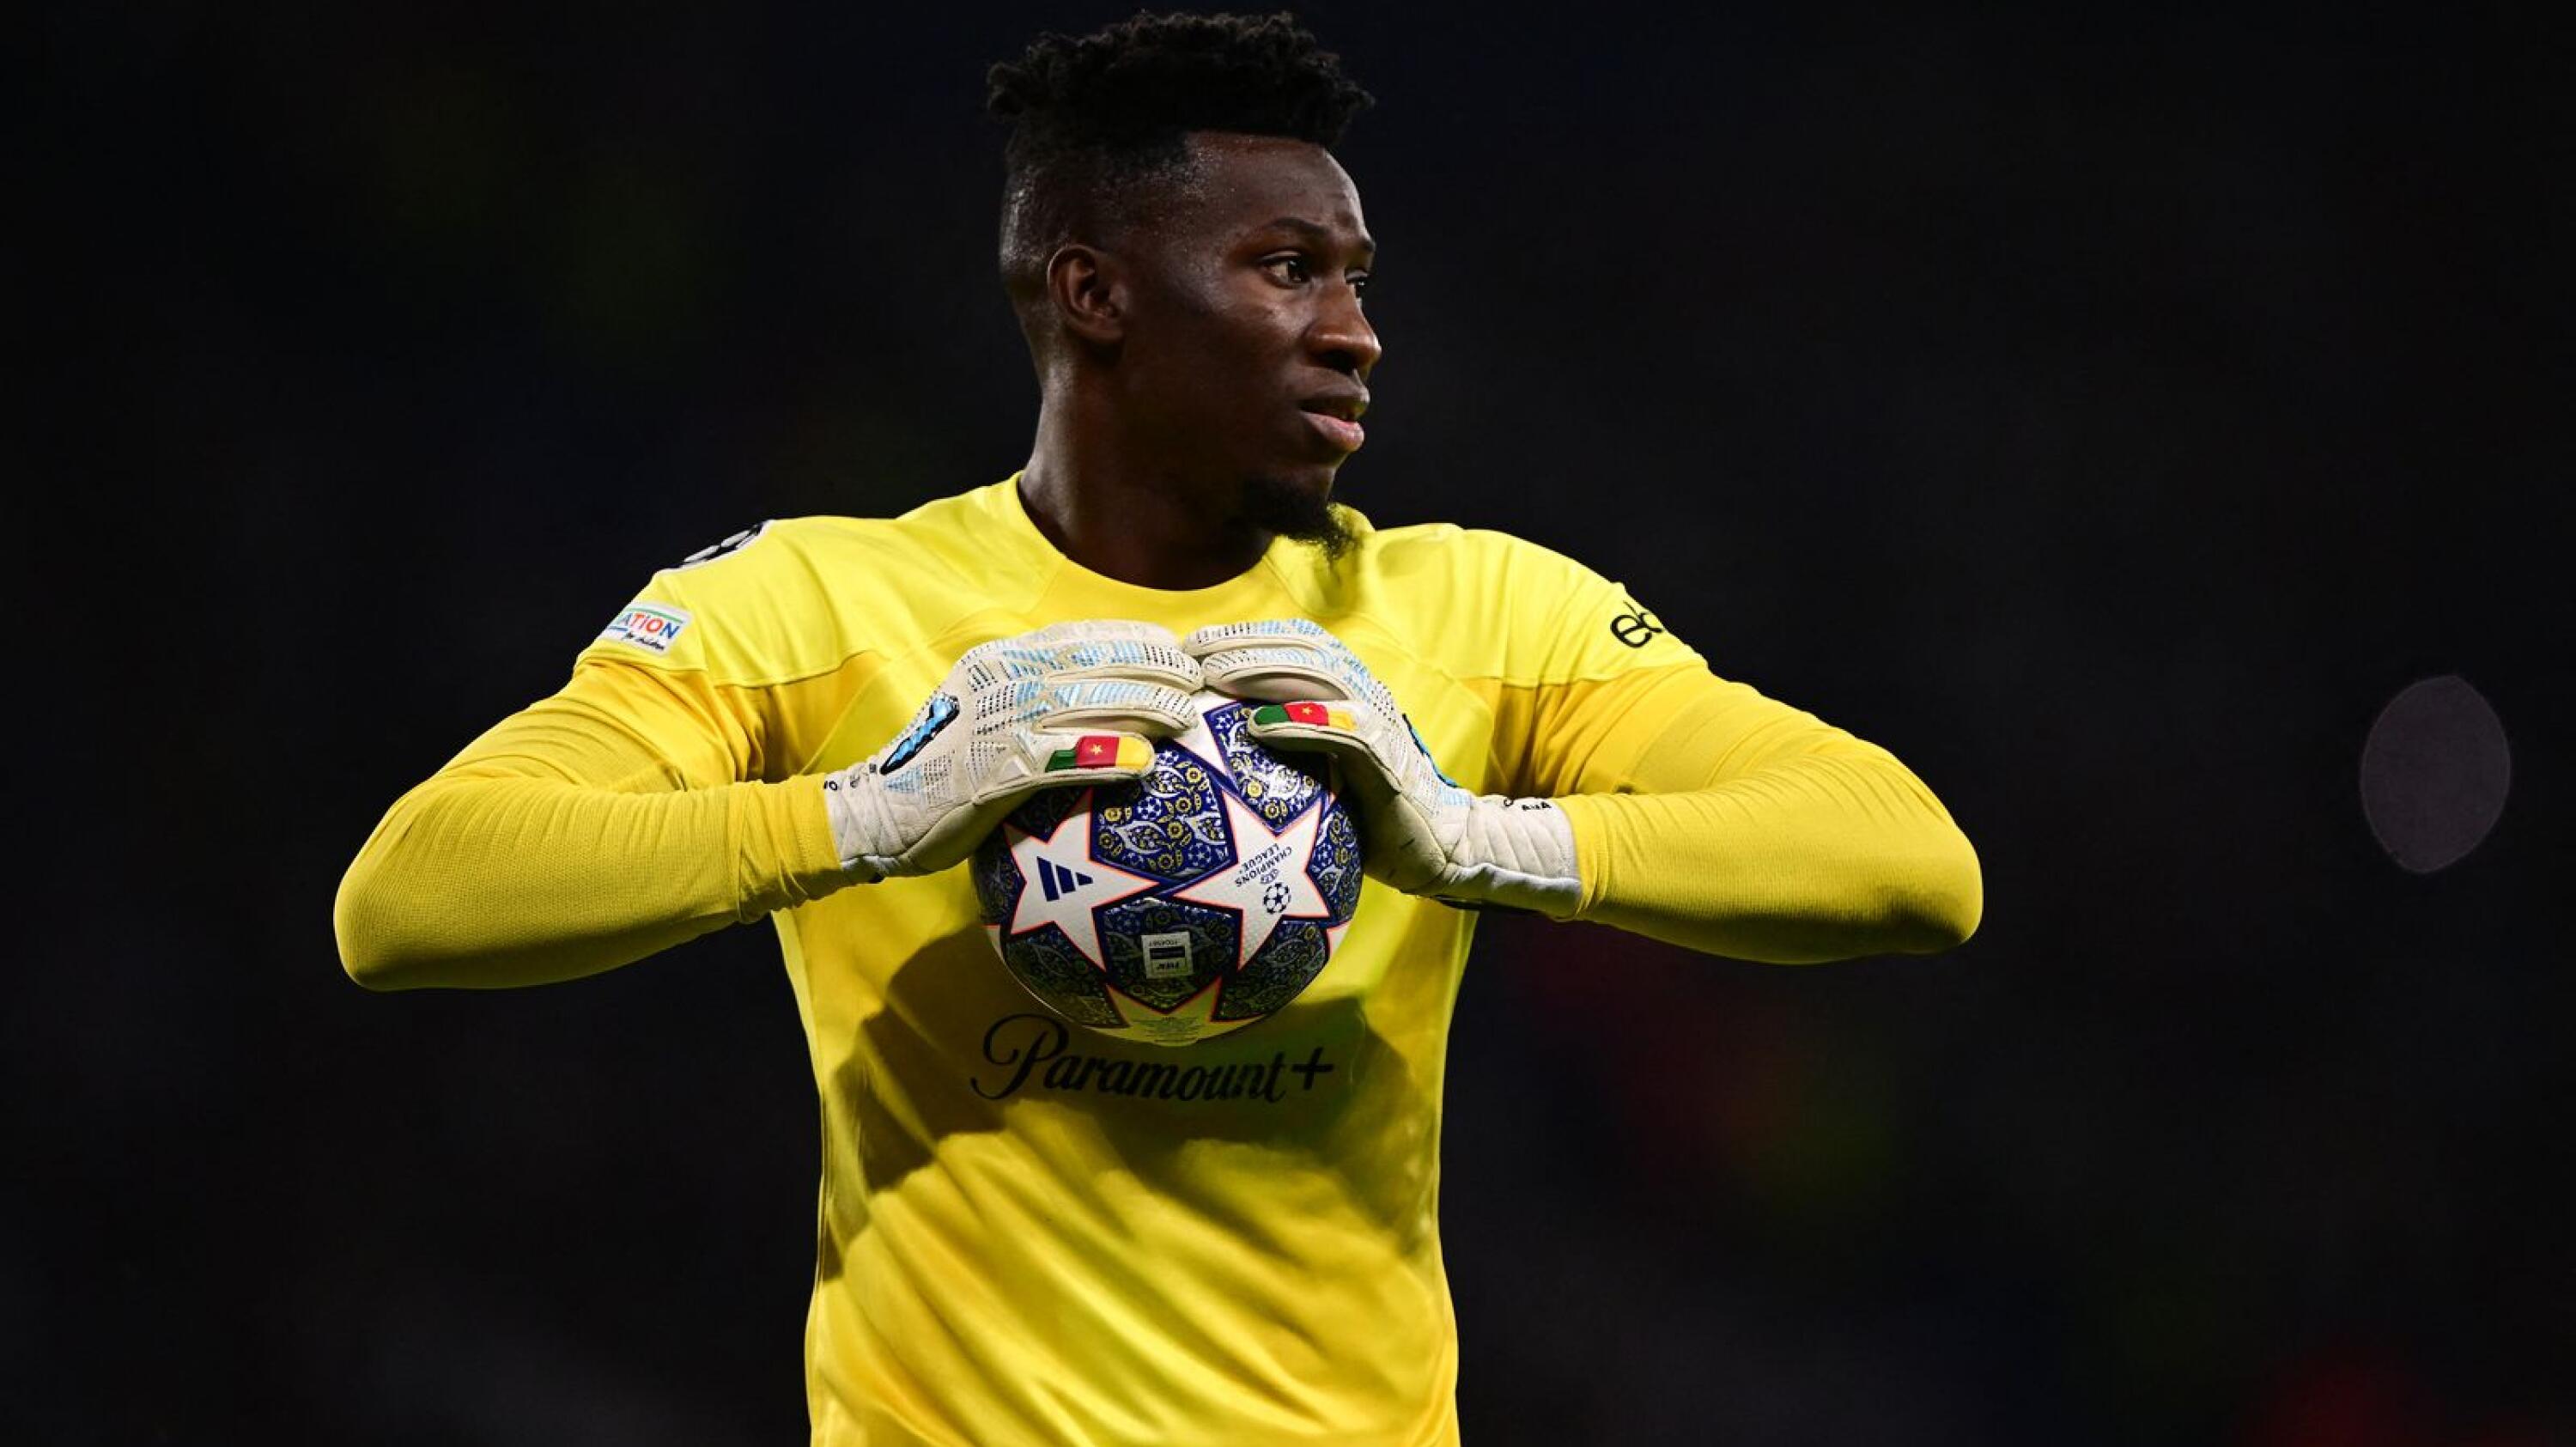 Premier League giants Manchester United are reportedly close to completing a deal to sign Cameroon goalkeeoer Andre Onana from Inter Milan